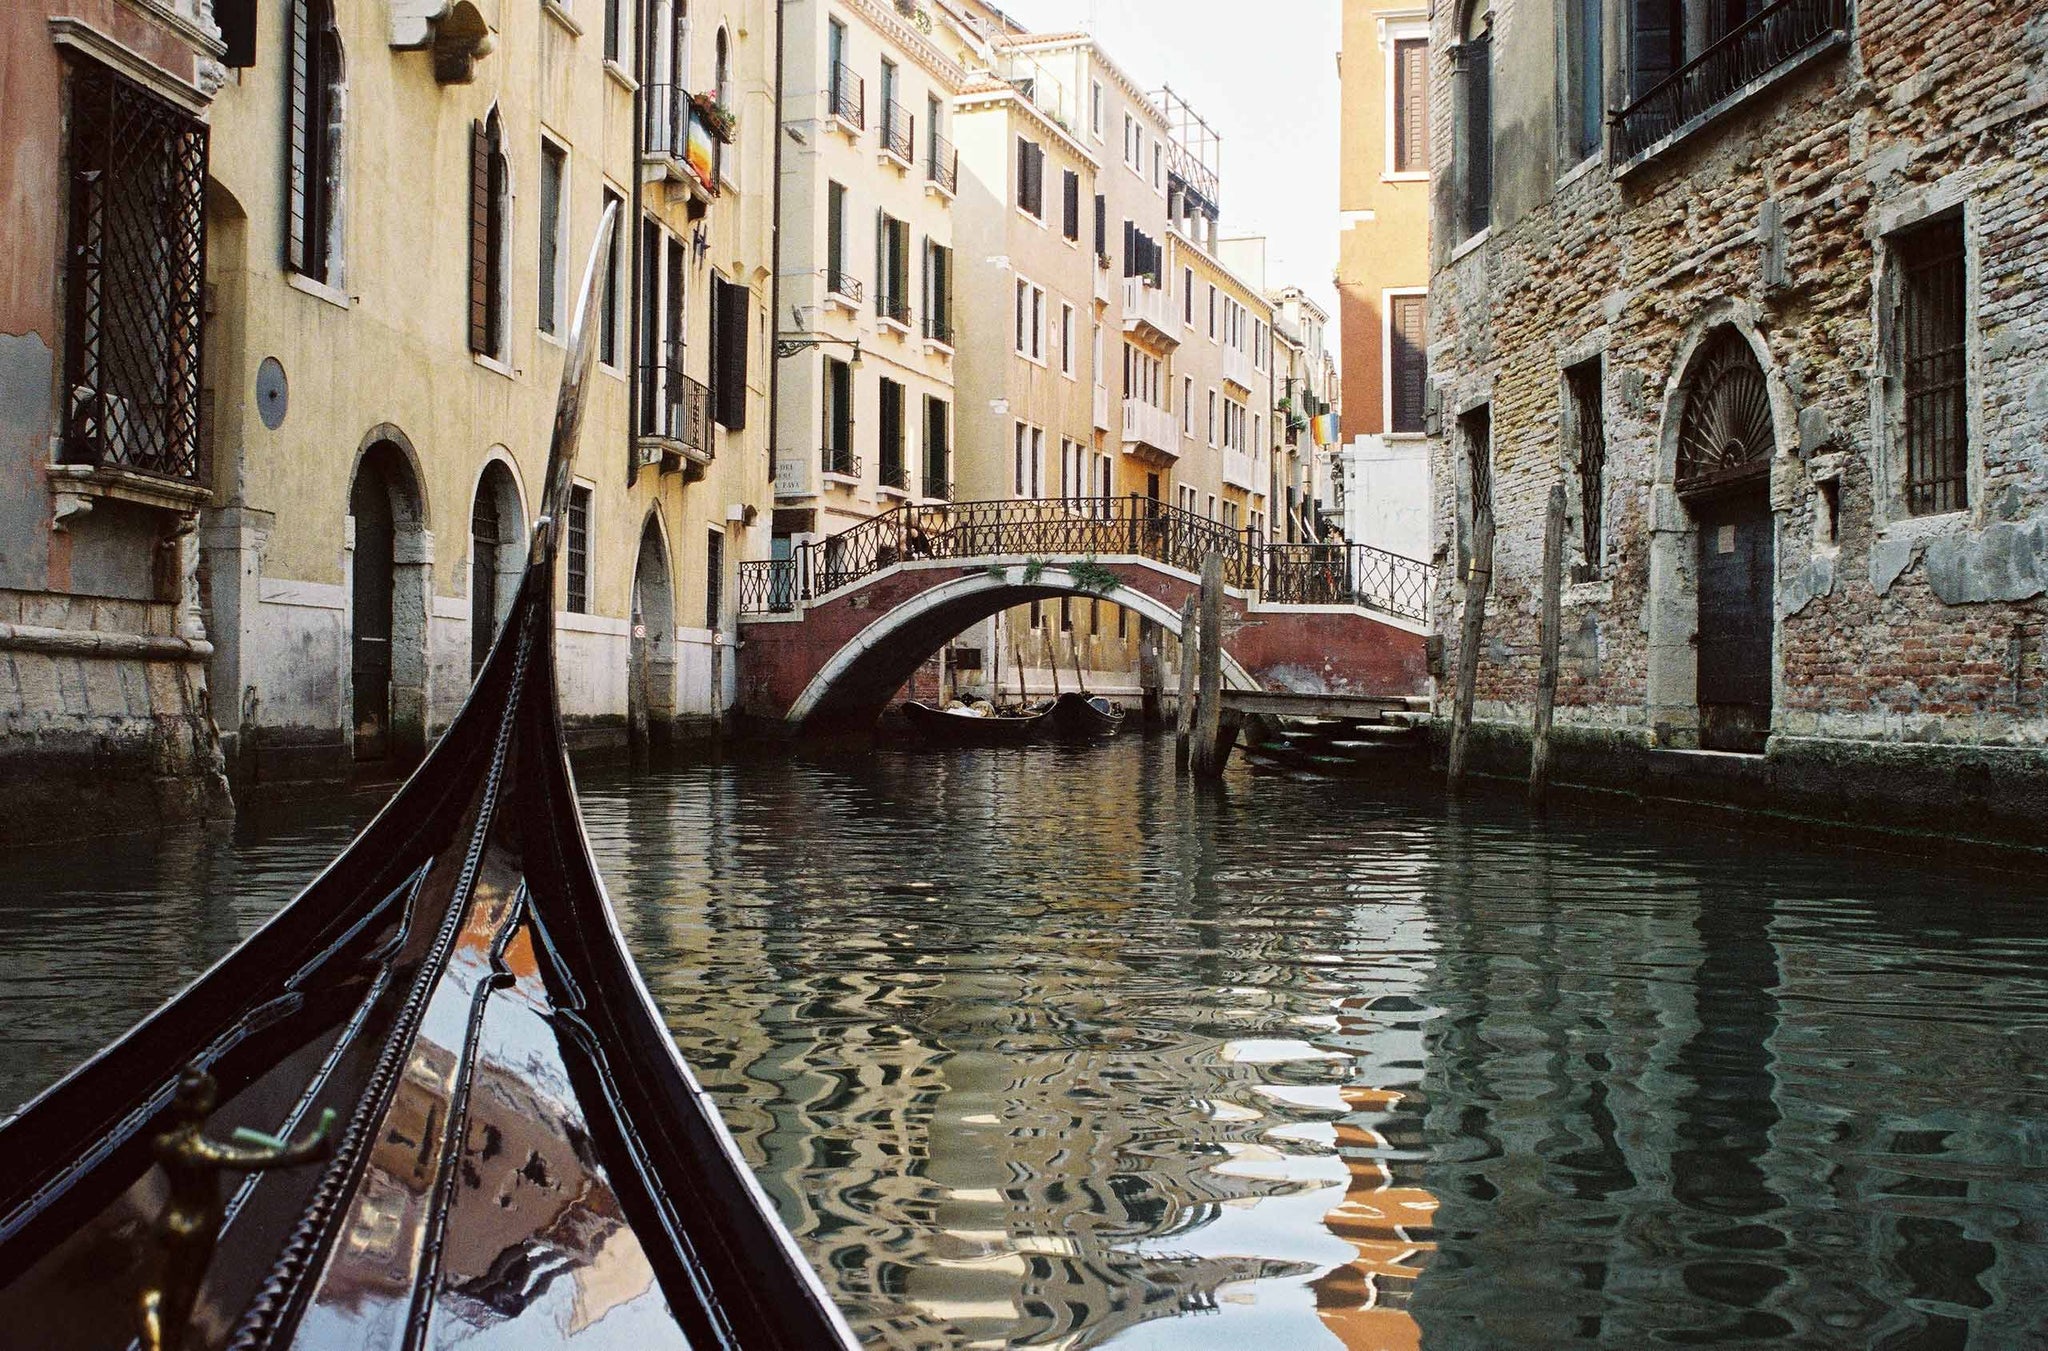 The front prow of a gondola points along the Venice canals as it travels towards the next bridge.